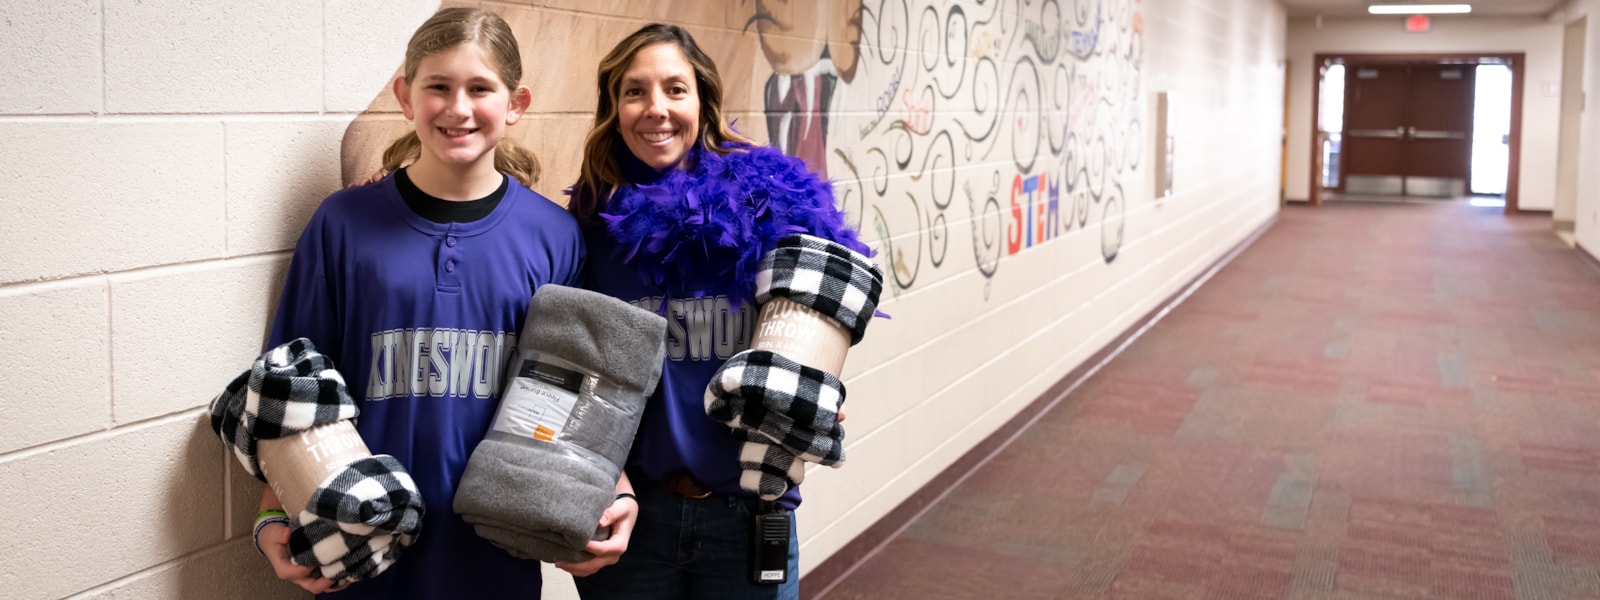 Canyon Ridge principal Jill Hoppe and Ollie McNeil pose for a photo with their buddy blankets.